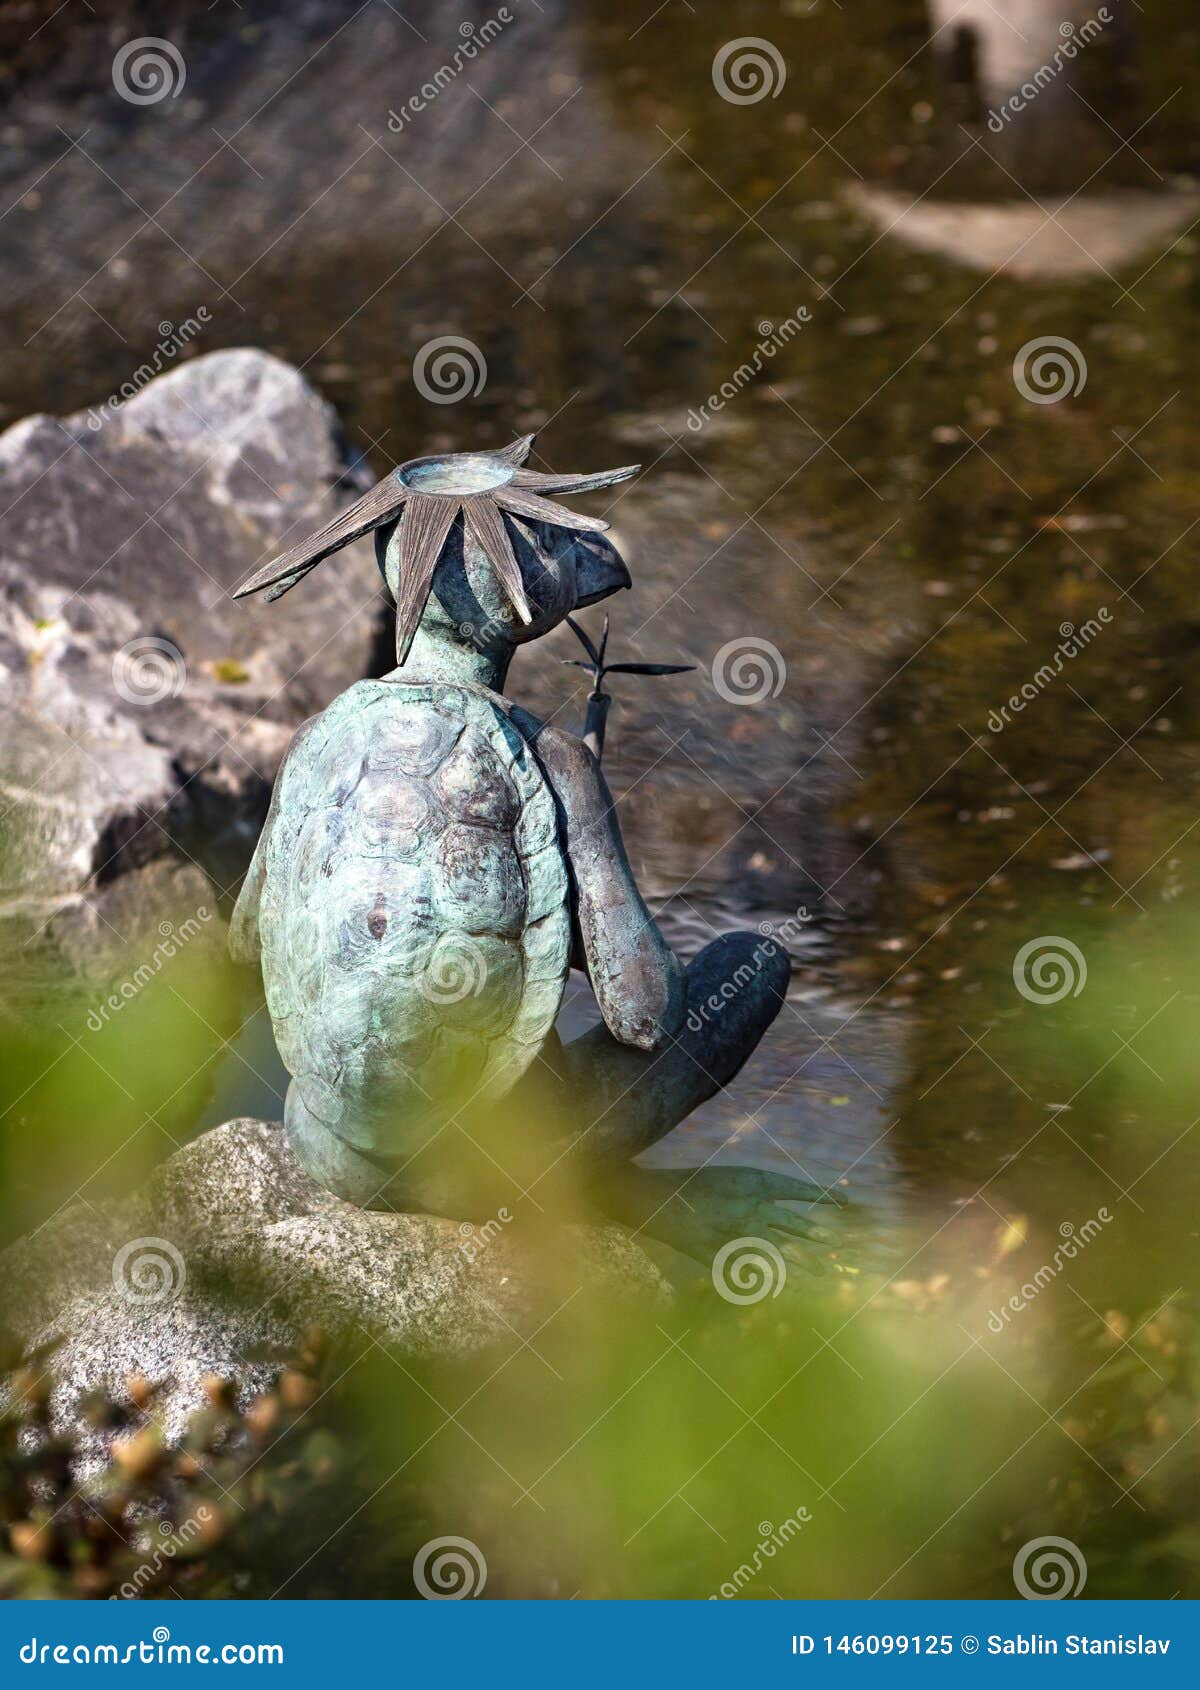 Japanese River God of the Kappa. Vintage Bronze Turtle in the Japanese  Garden. Stock Image - Image of animal, garden: 146099125